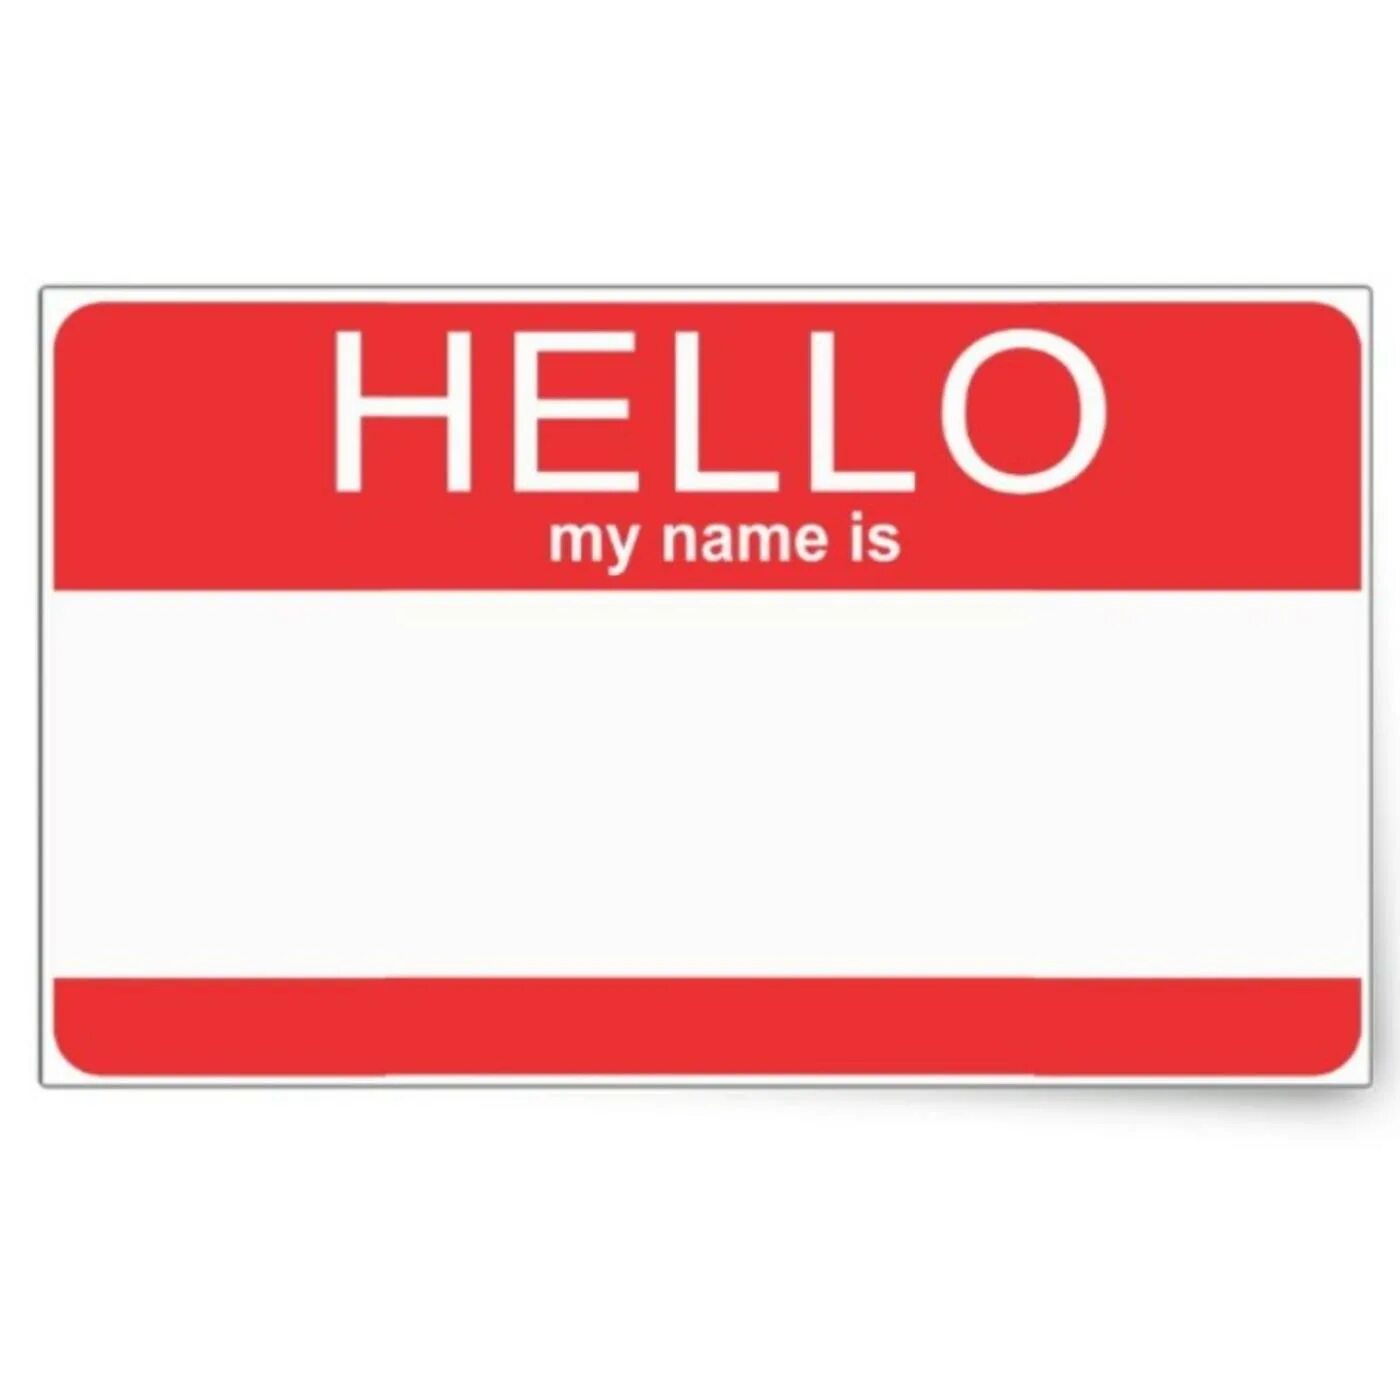 Hello i am low. Стикеры hello my name is. Наклейки hello my name. Наклейка my name is. Табличка hello my name is.